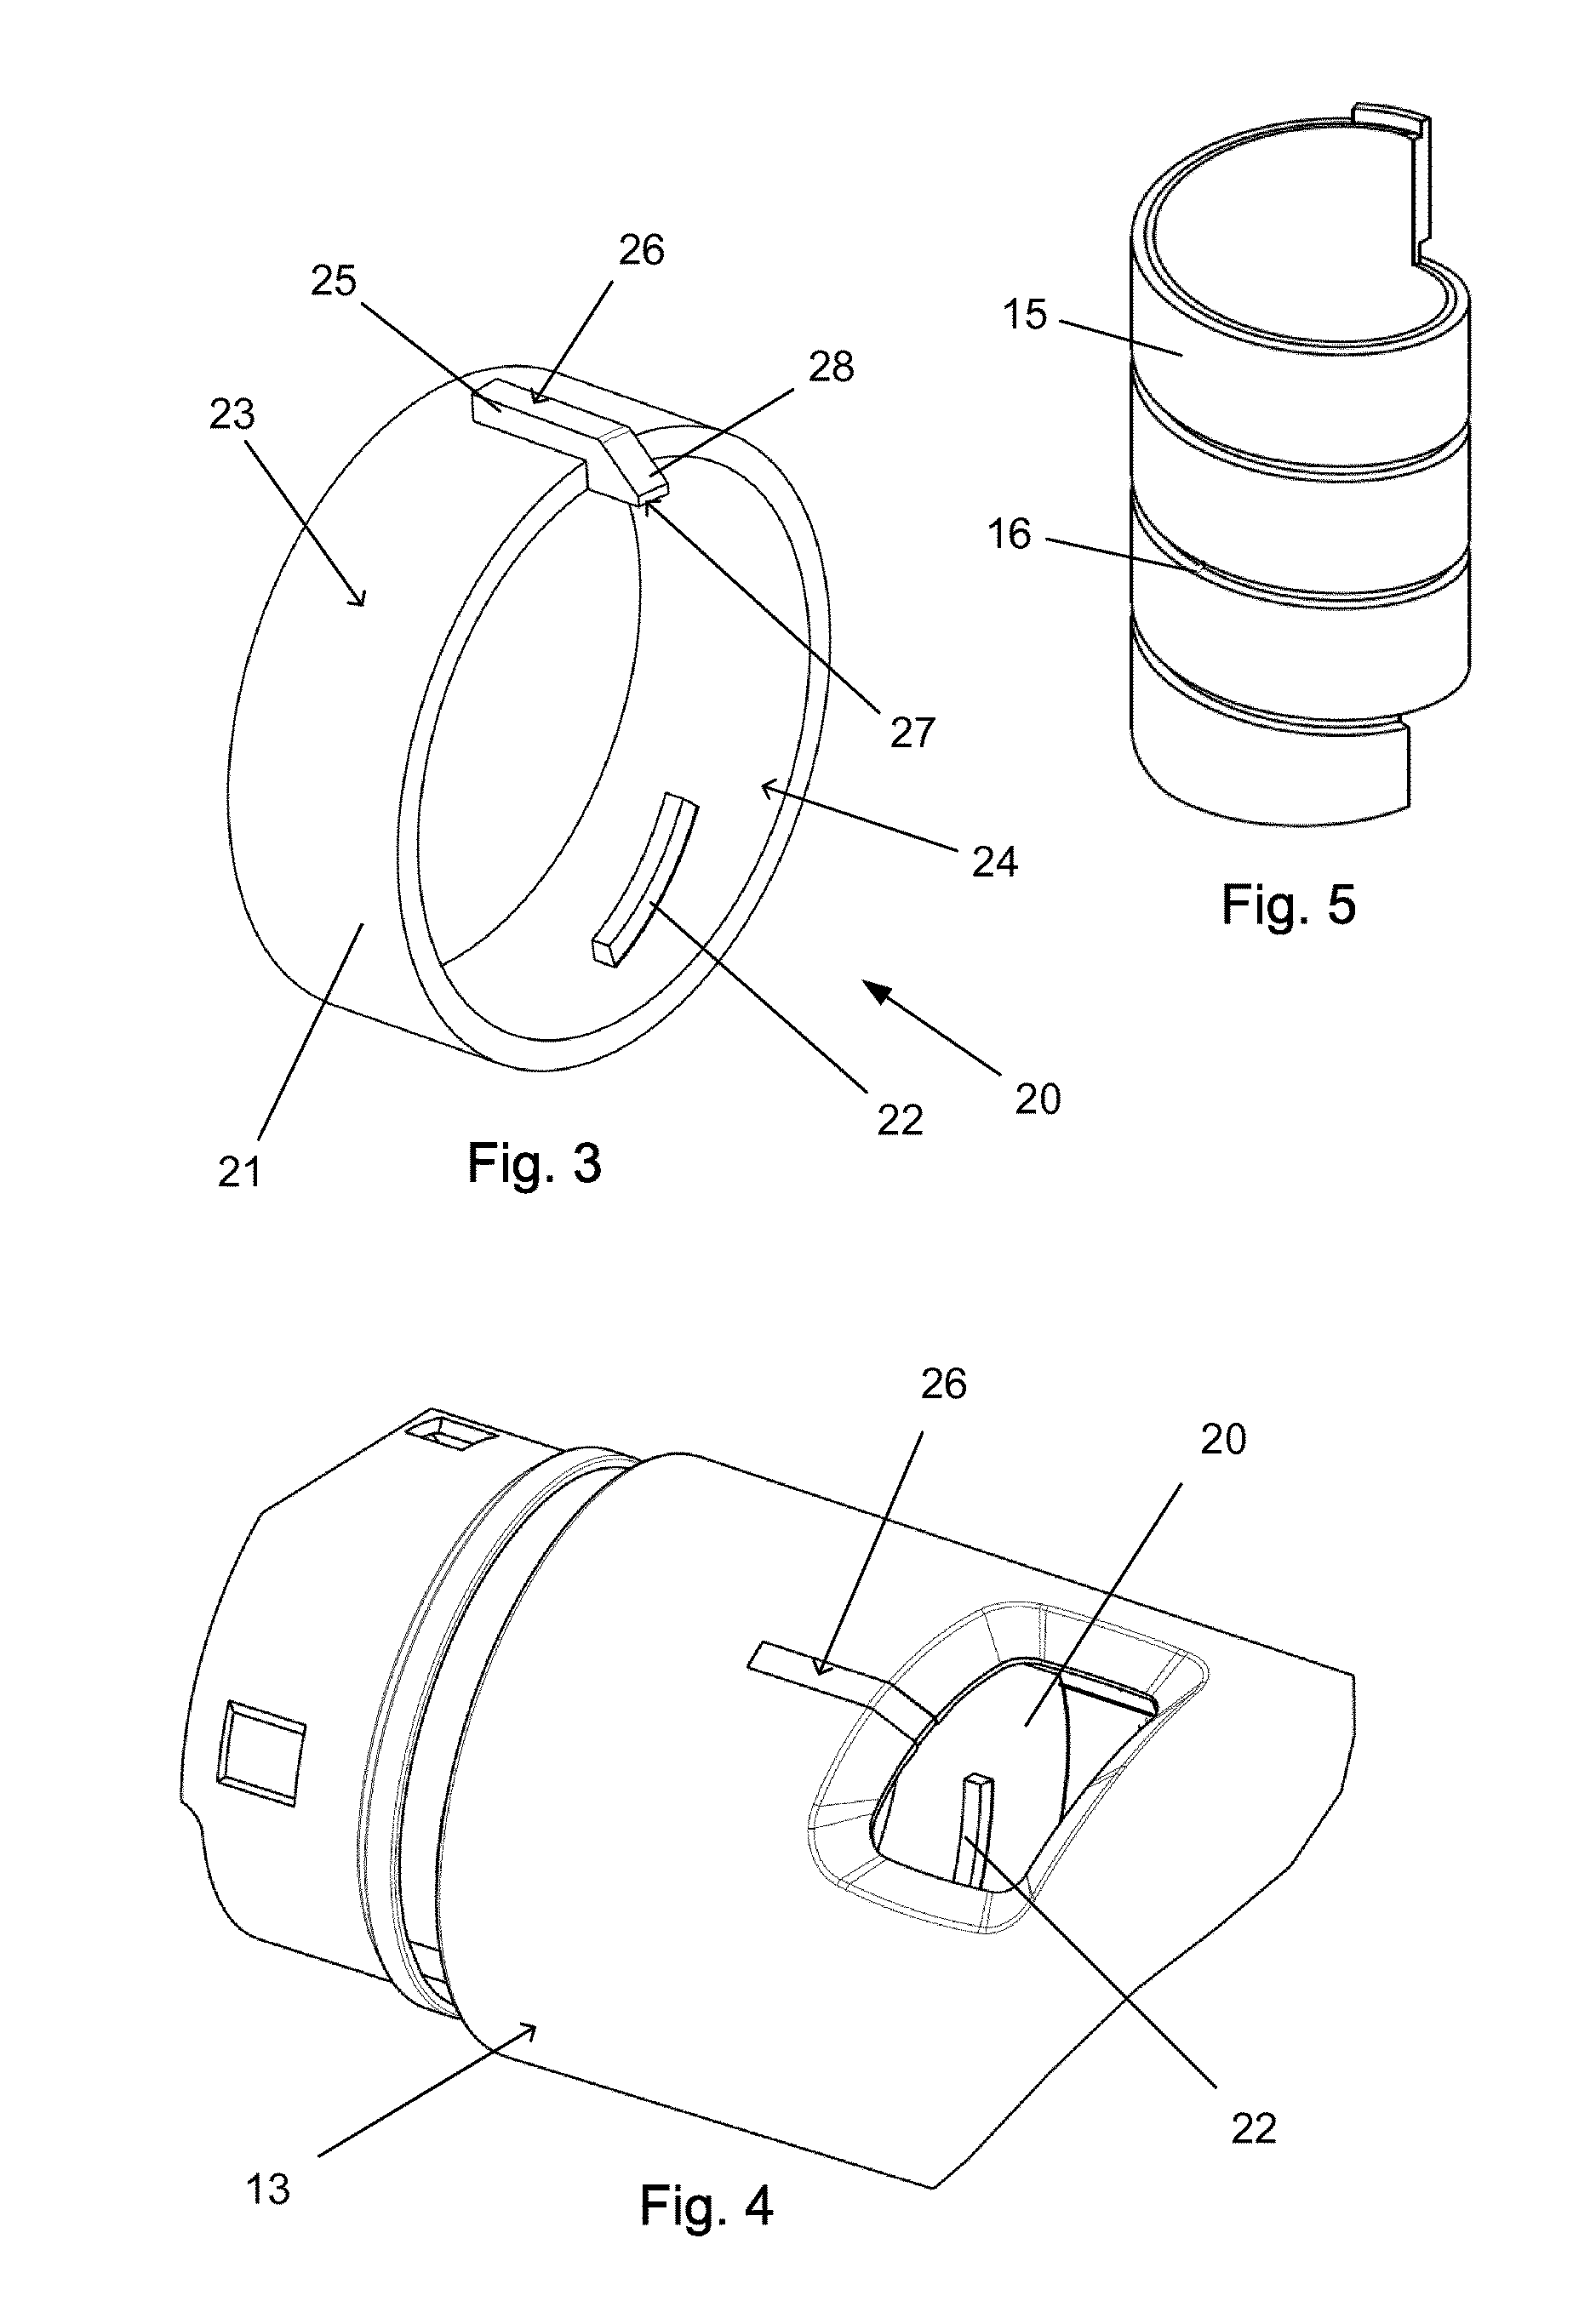 A Housing for a Medical Injection Device